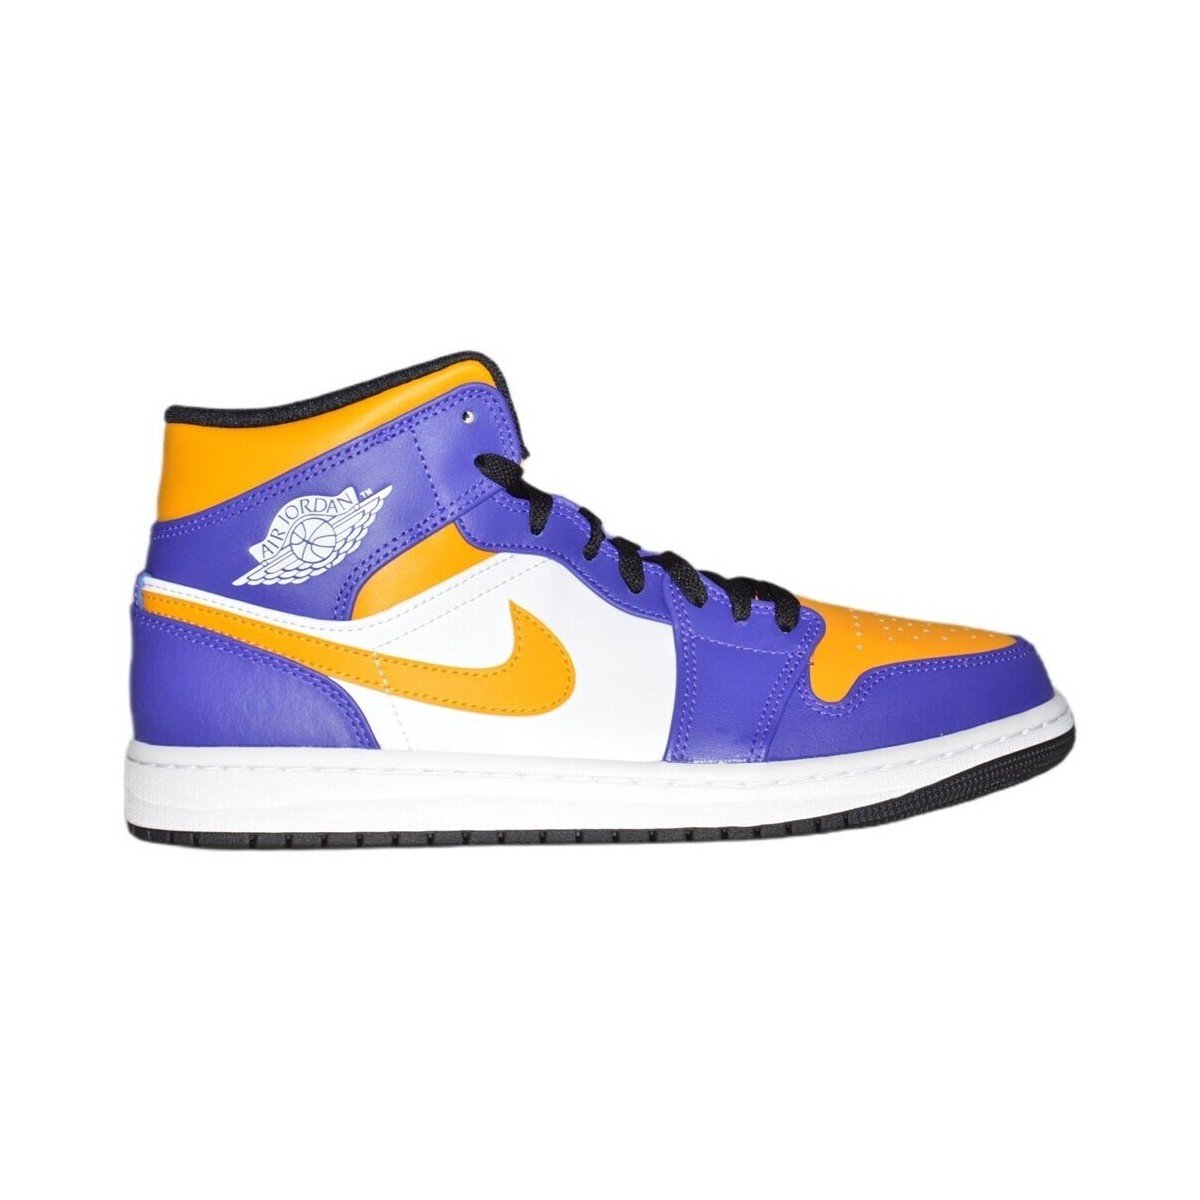 Shoes Men Mid boots Nike Air Jordan 1 los angeles lakers Yellow, White, Violet